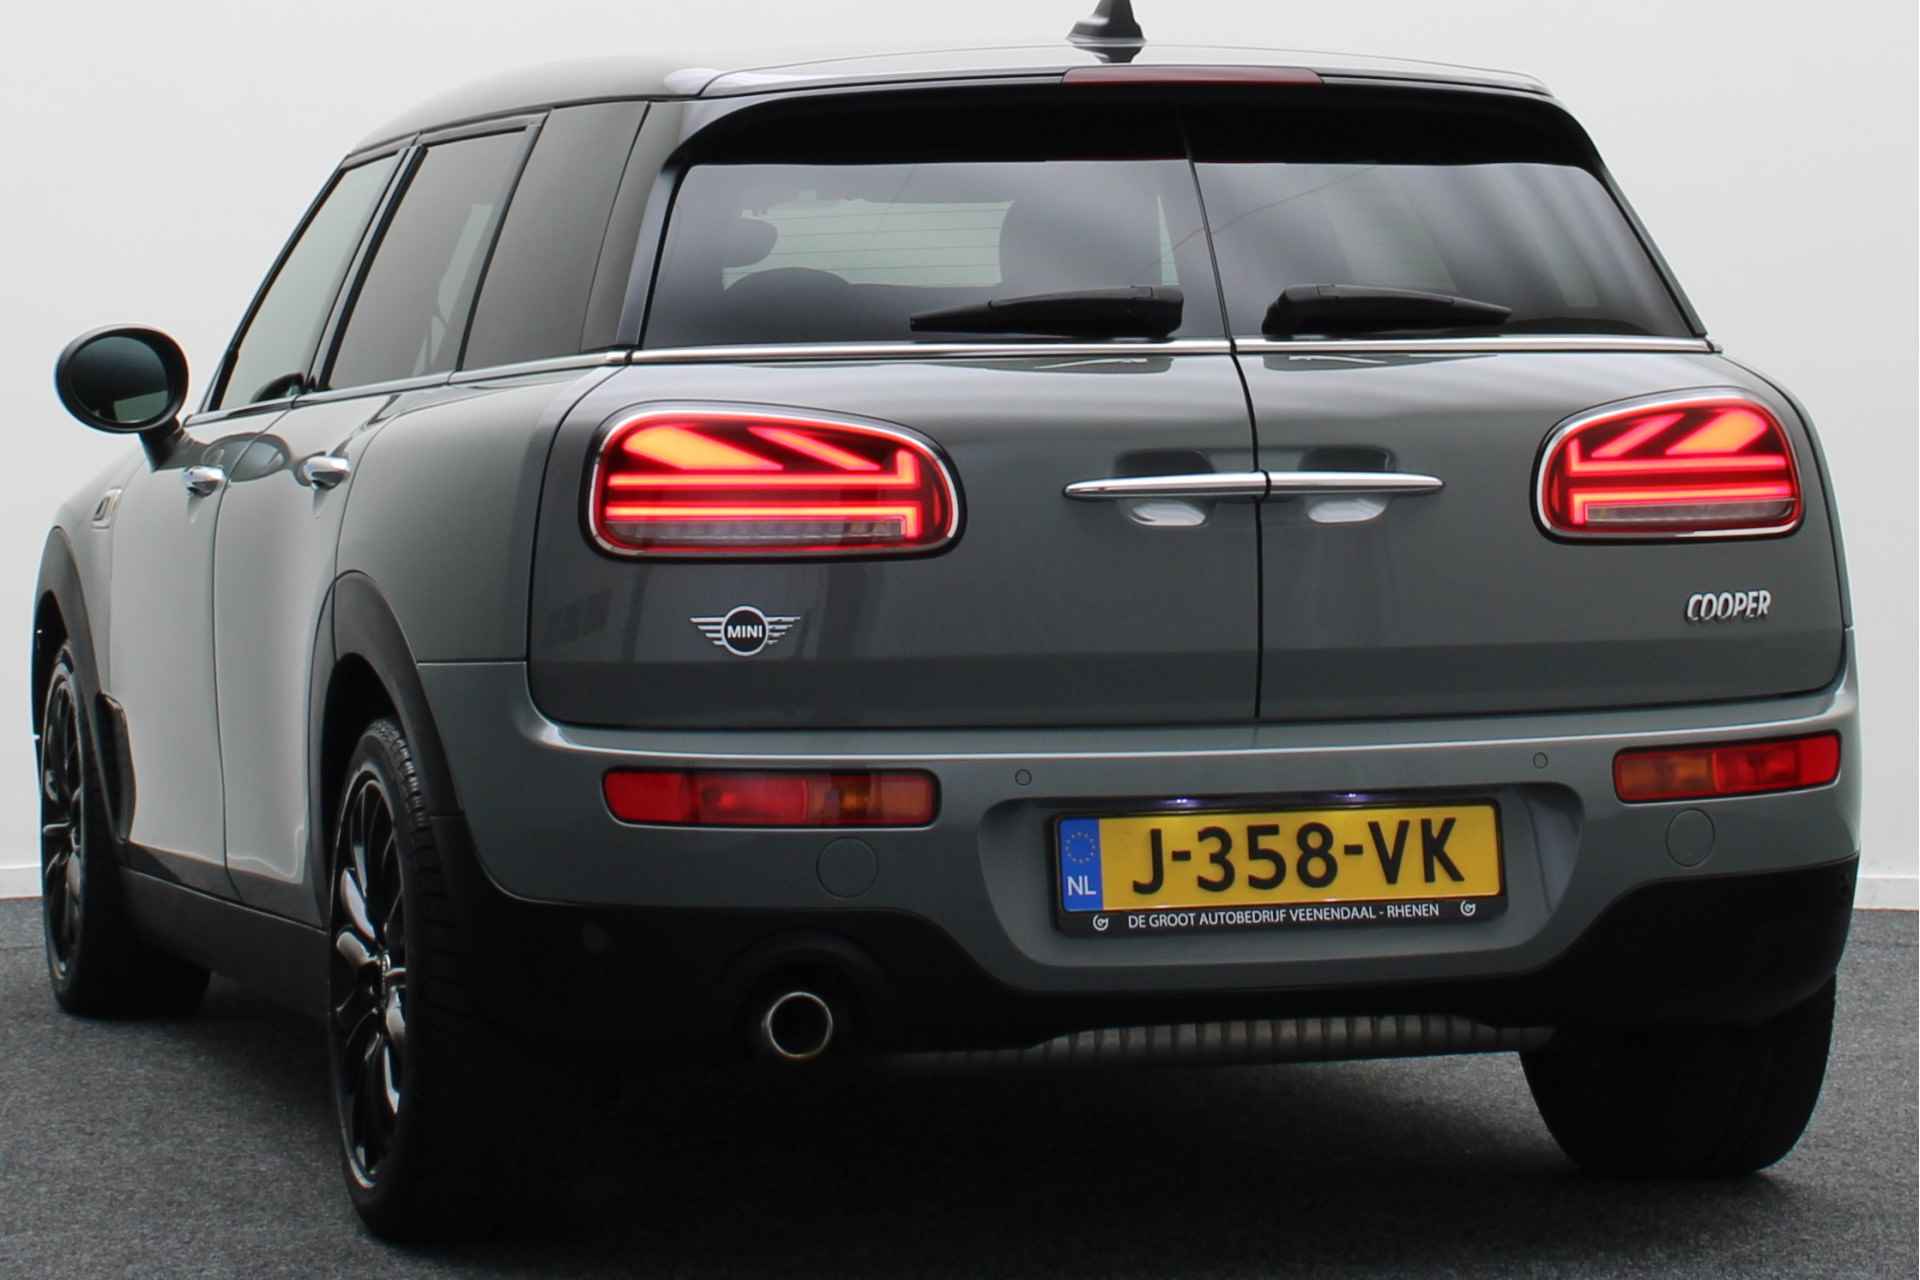 MINI Clubman 1.5 Cooper Business Edition Automaat LED, Keyless, Two-Tone lak, Navigatie, Cruise, PDC, Climate, 17” - 16/44